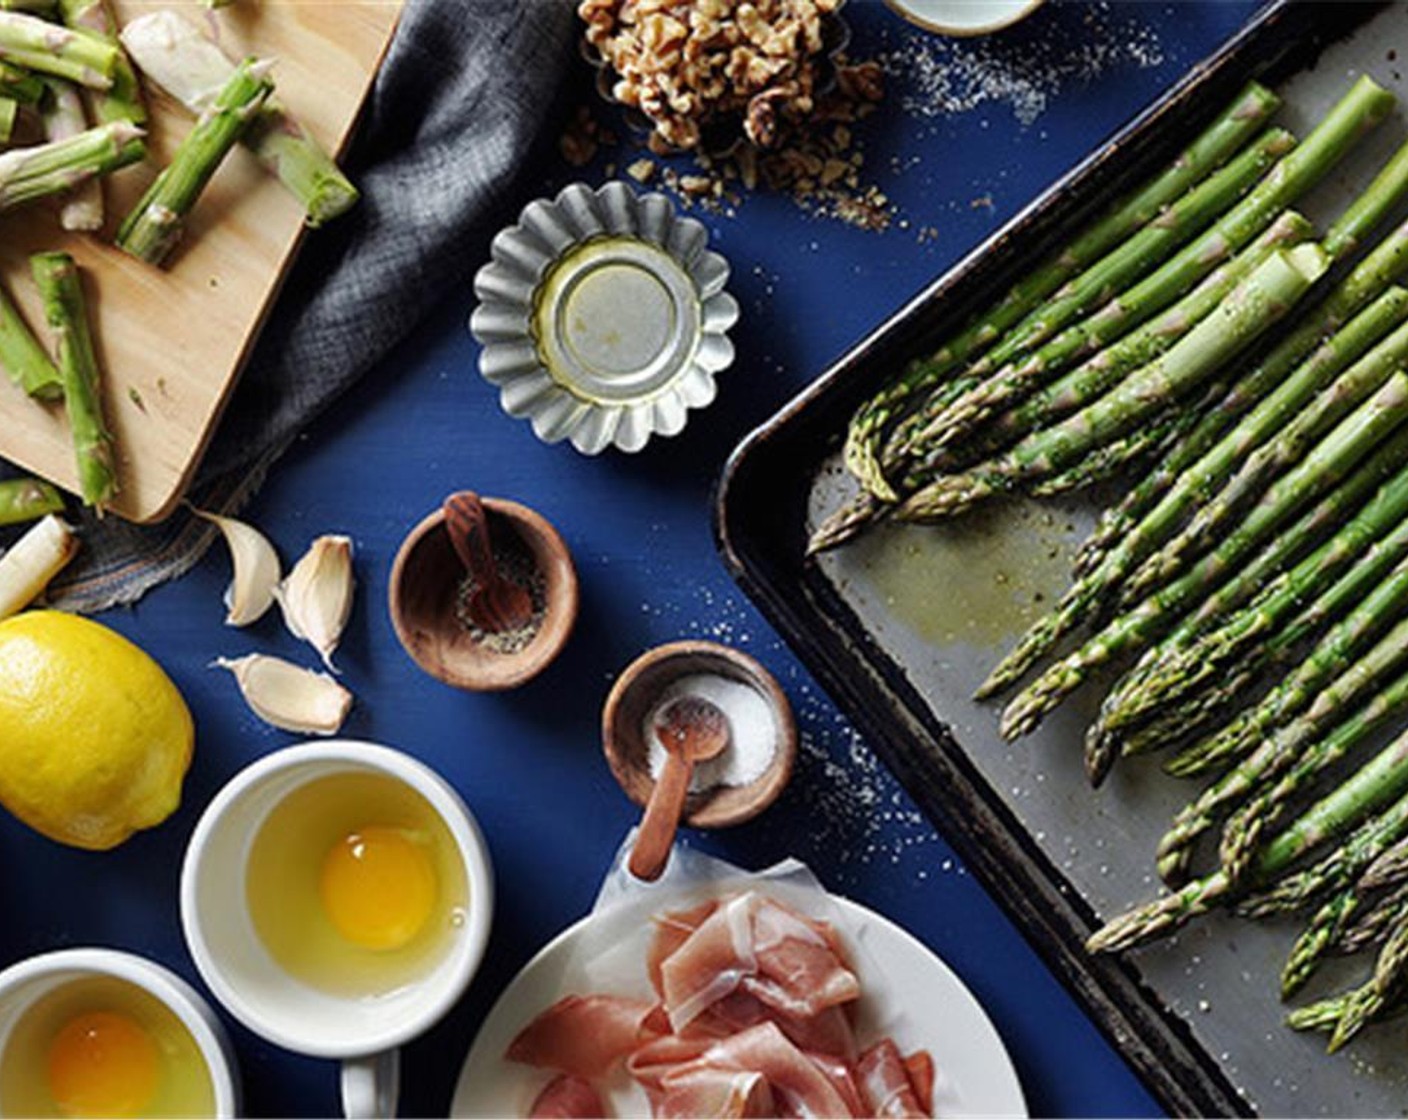 step 5 Place the Asparagus (6 1/2 cups) on a baking sheet, drizzle with Olive Oil (1 Tbsp), season with Salt (1/2 tsp) and Ground Black Pepper (1/2 tsp). Toss to combine and evenly coat.